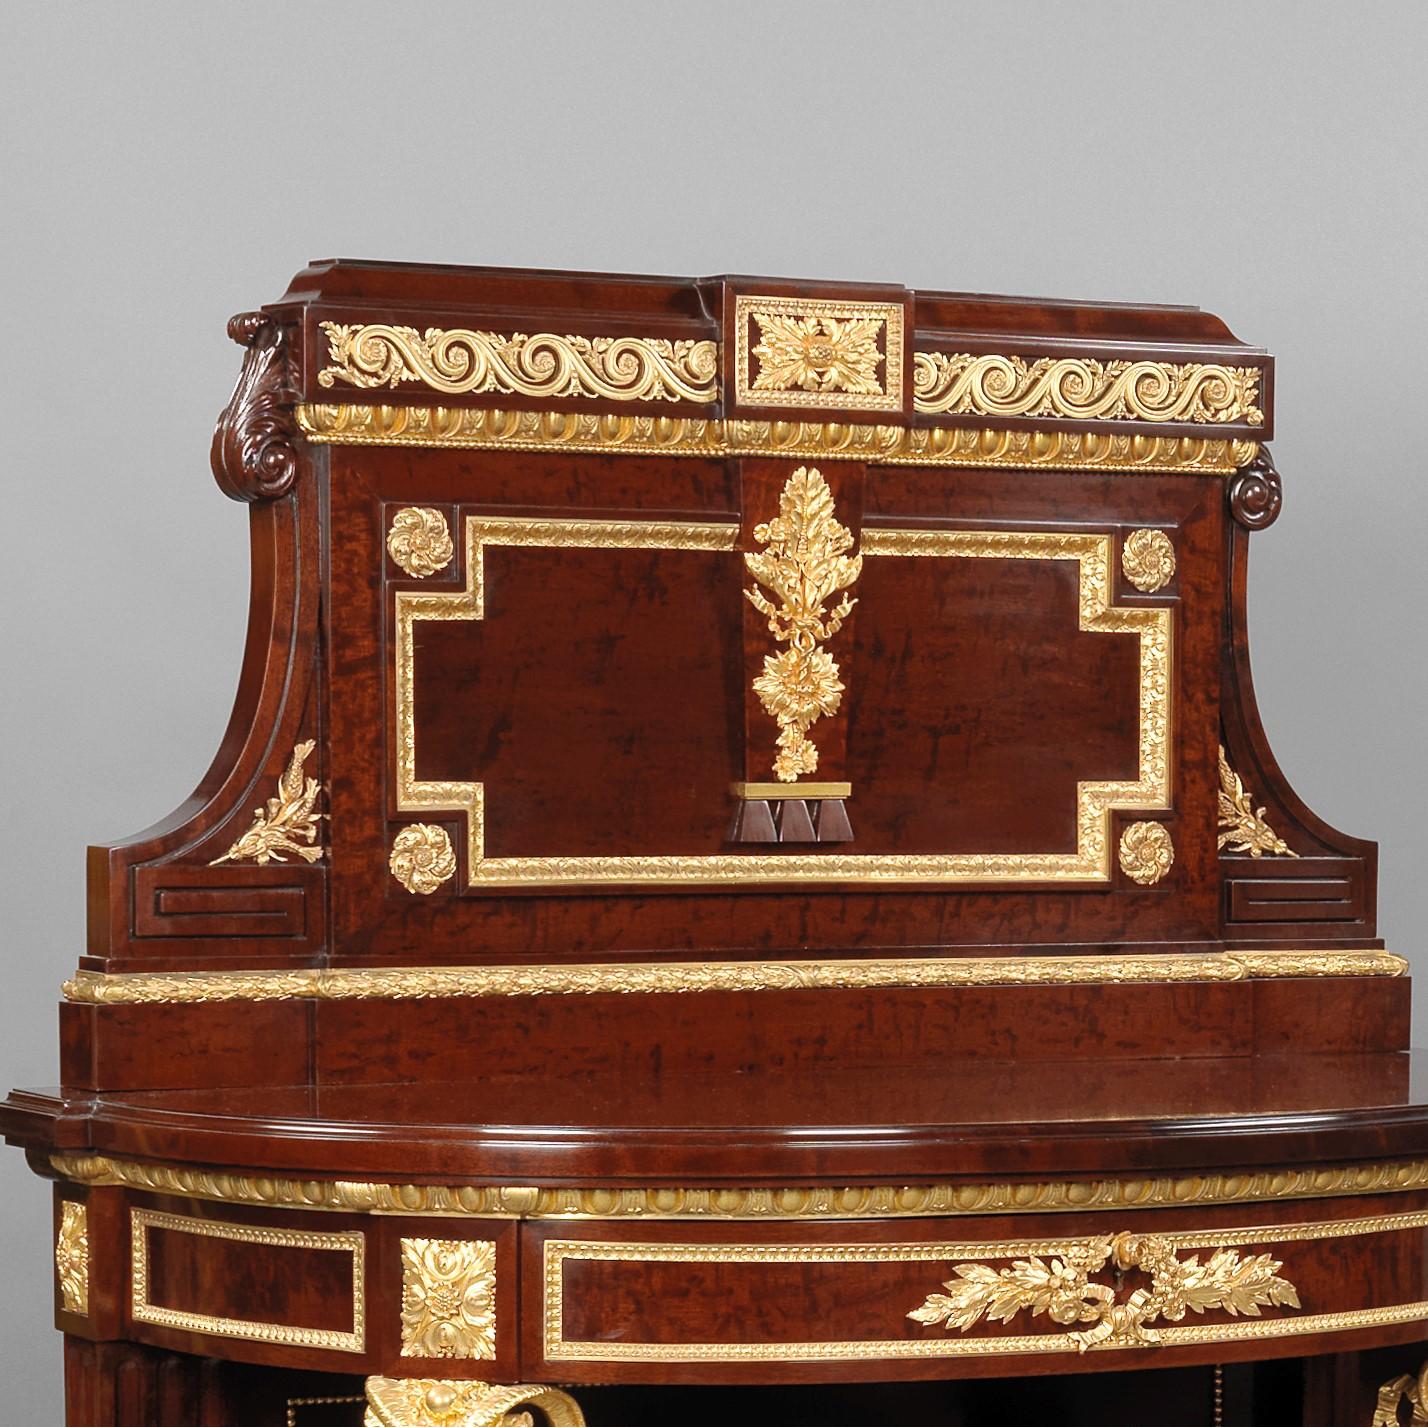 Napoleon III Near Pair of Mahogany Consoles Dessertes by Maison Grohé, French, circa 1860 For Sale